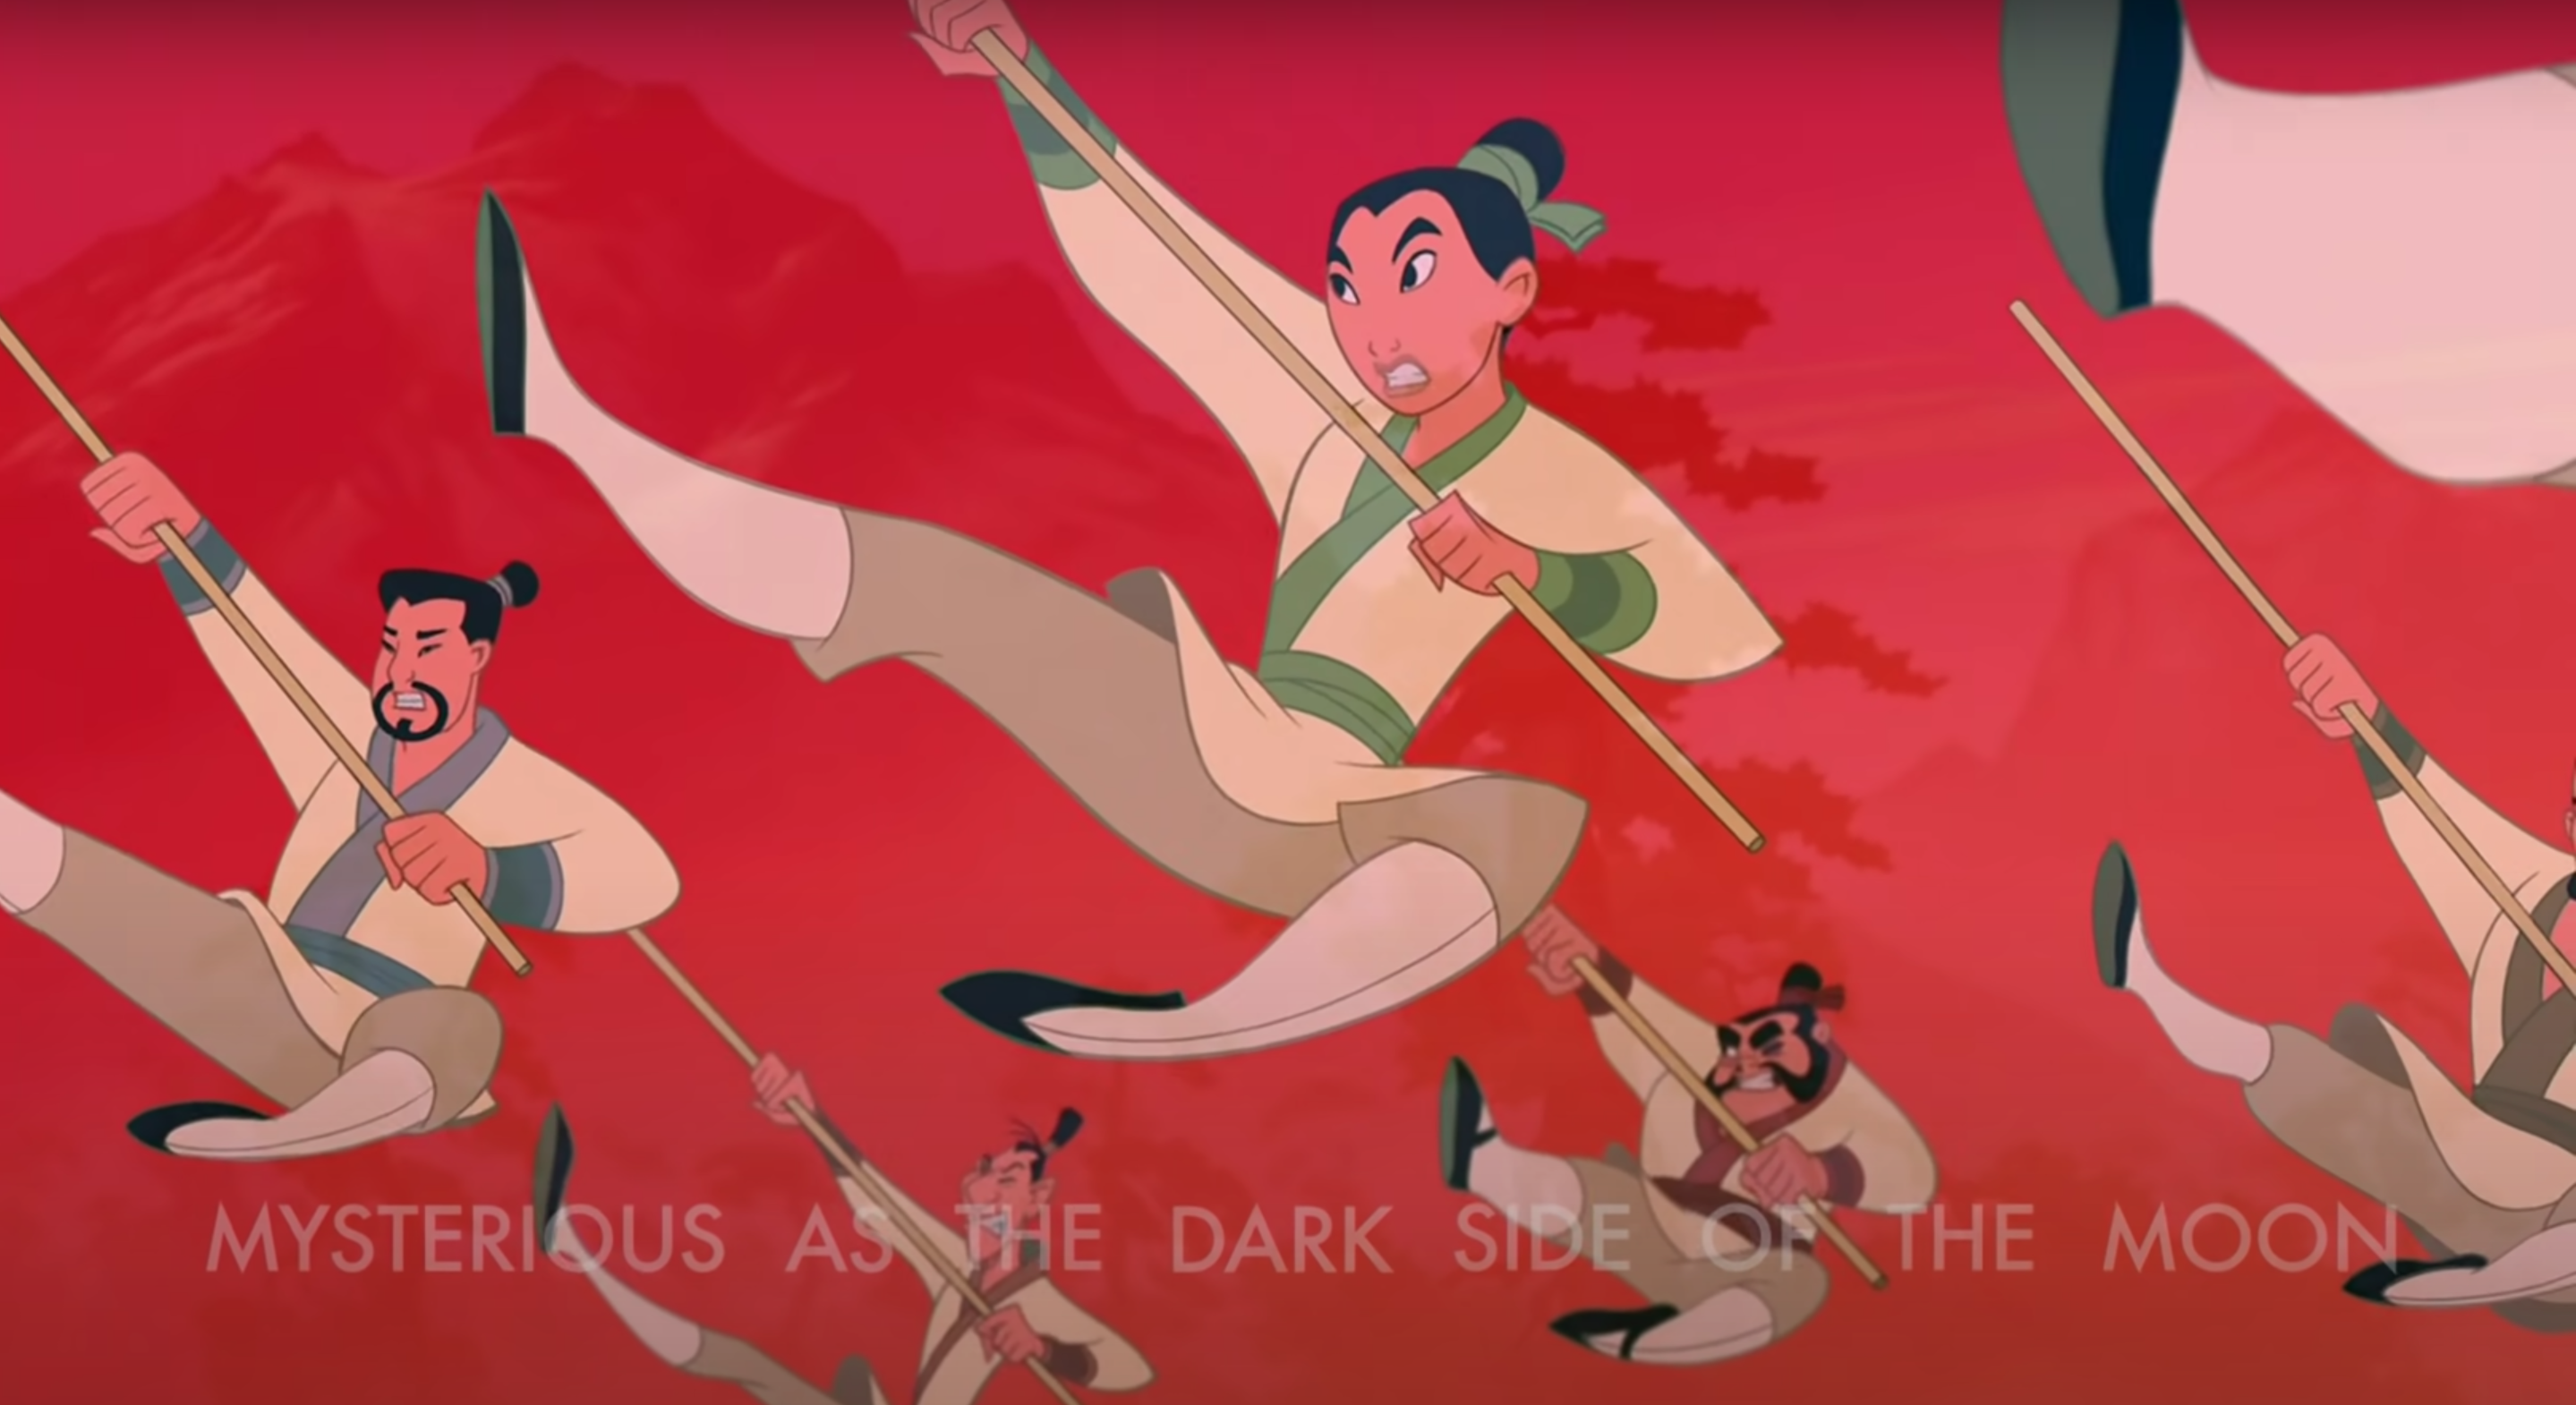 Mulan poses with her spear against a red background